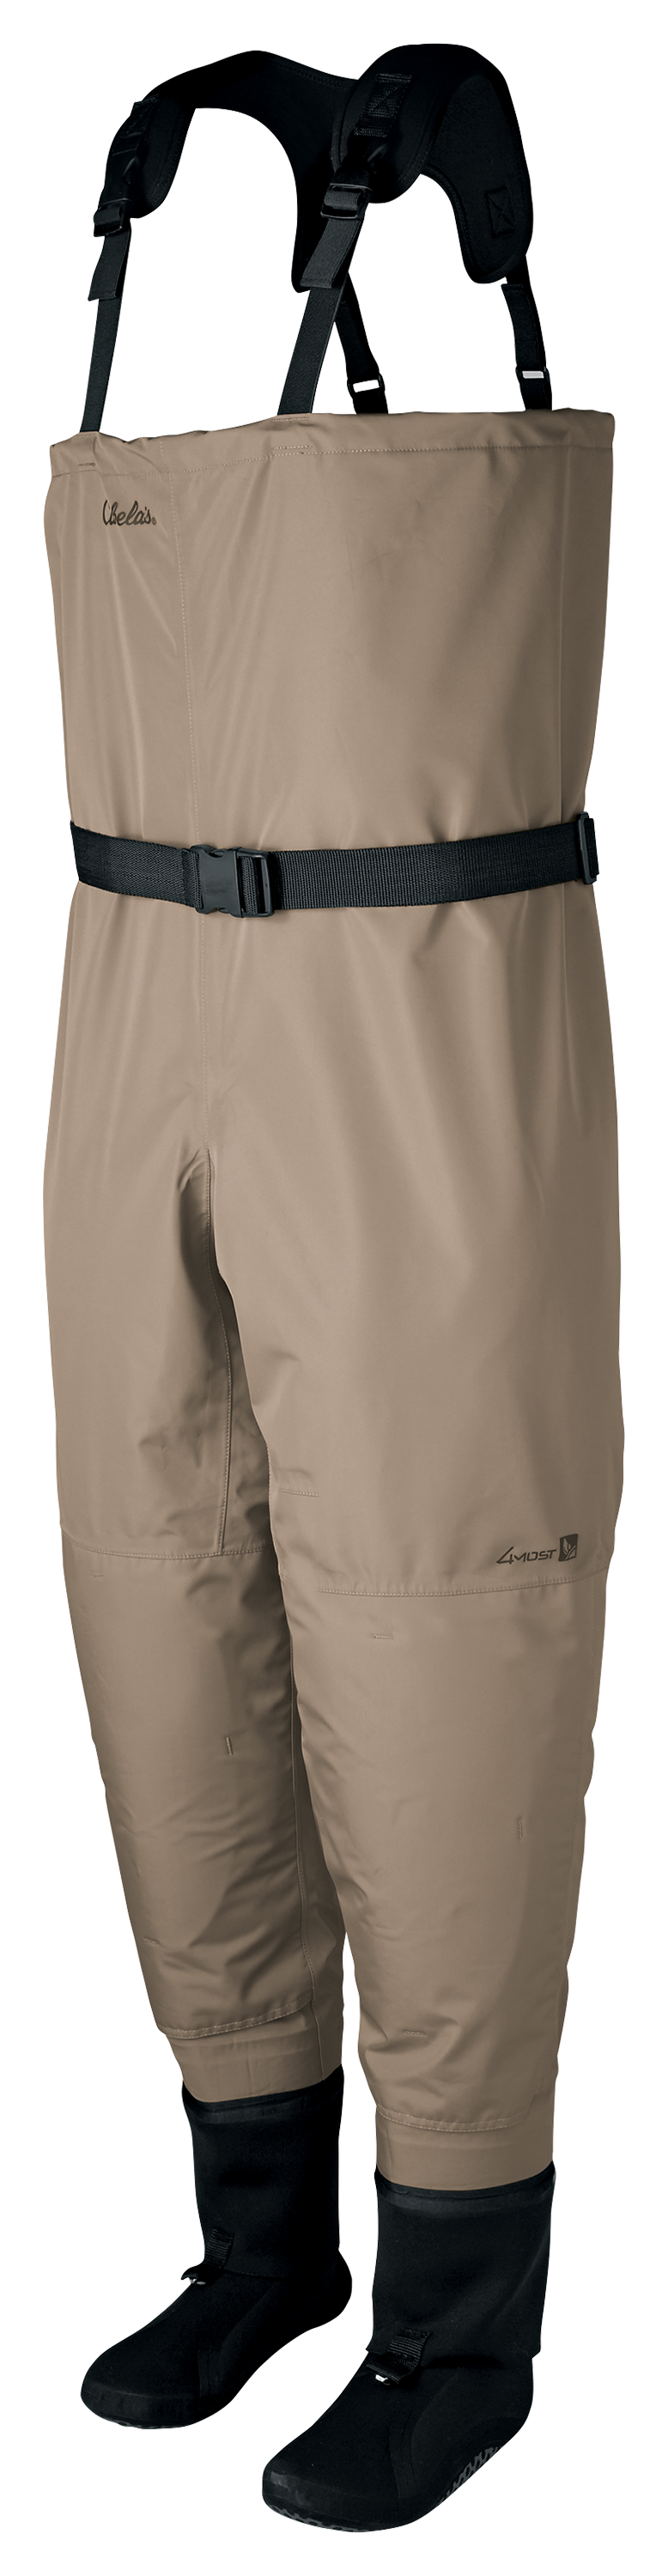 Cabelas Dry-Plus Stocking-Foot Trout Fishing Waders for Men Tan MR 83-0203  (I6)